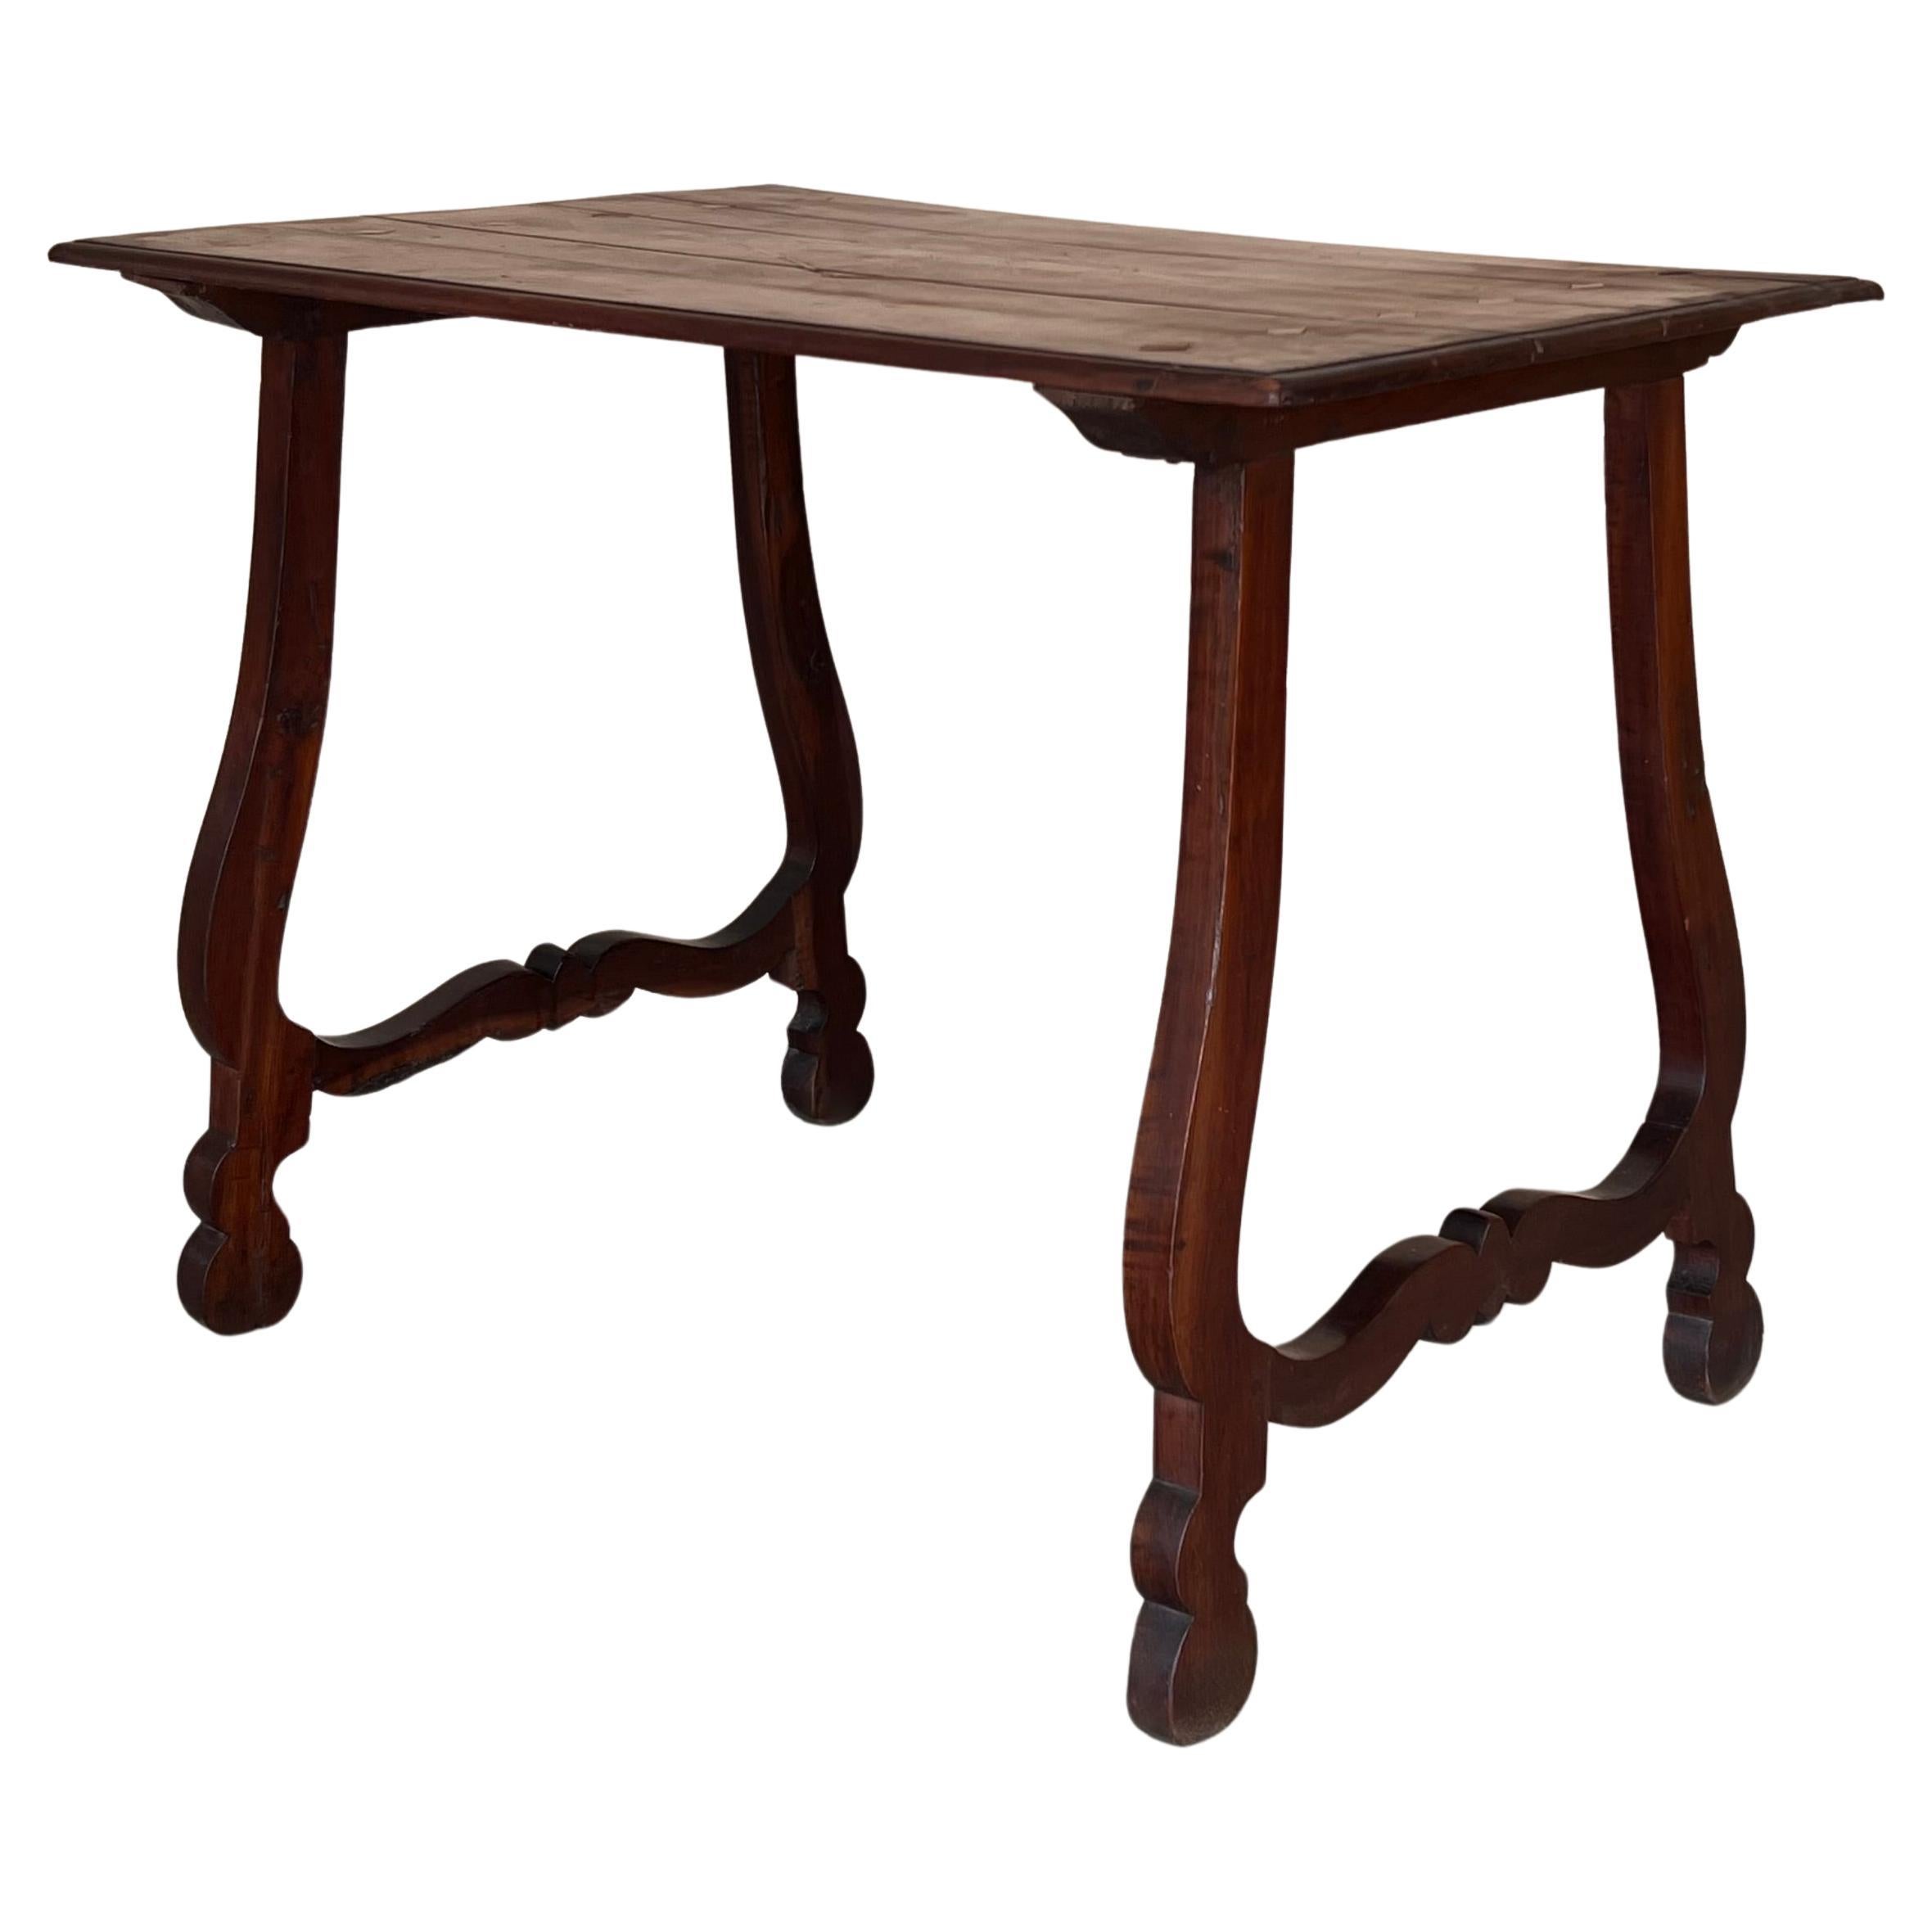 Side Table of Walnut with Carved Lyre Legs and Top, Spanish, 19th Century For Sale